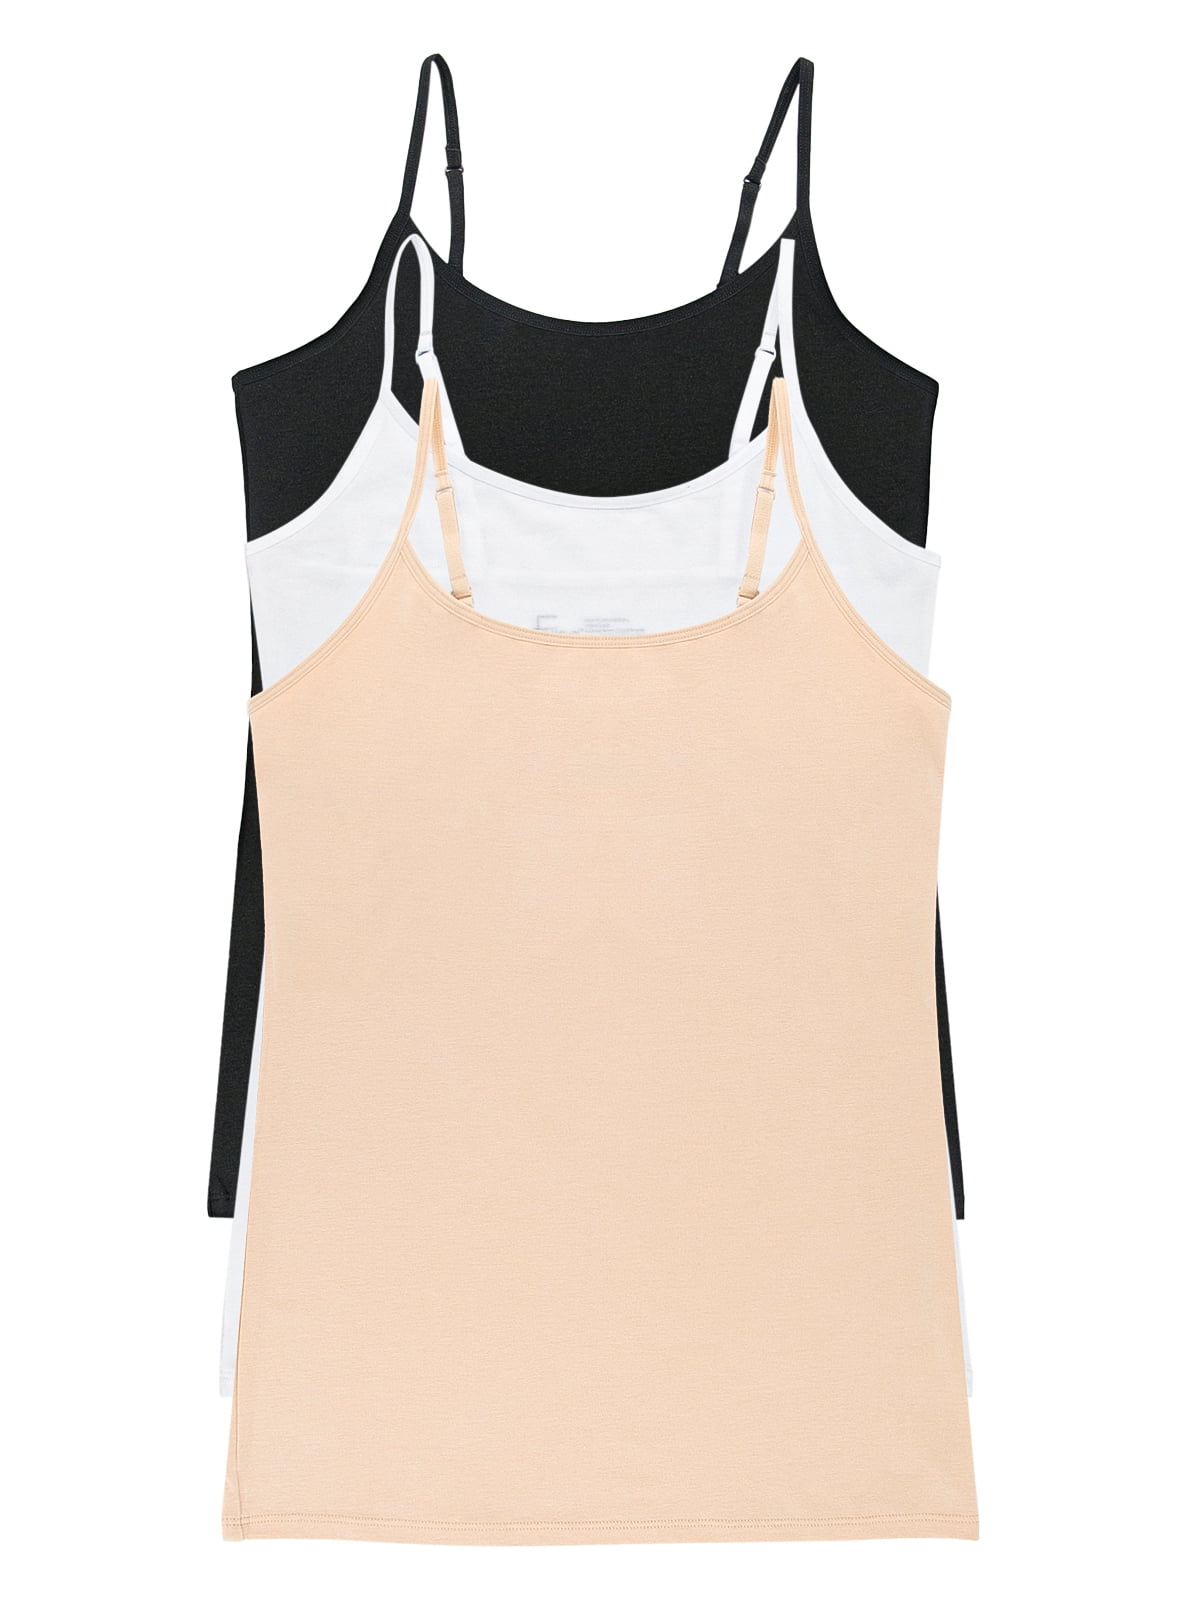 [211] White, Nude, Crème - Solid (Three in a Pack) Snap-to-Bra Mock  Camisole - Original Classic.